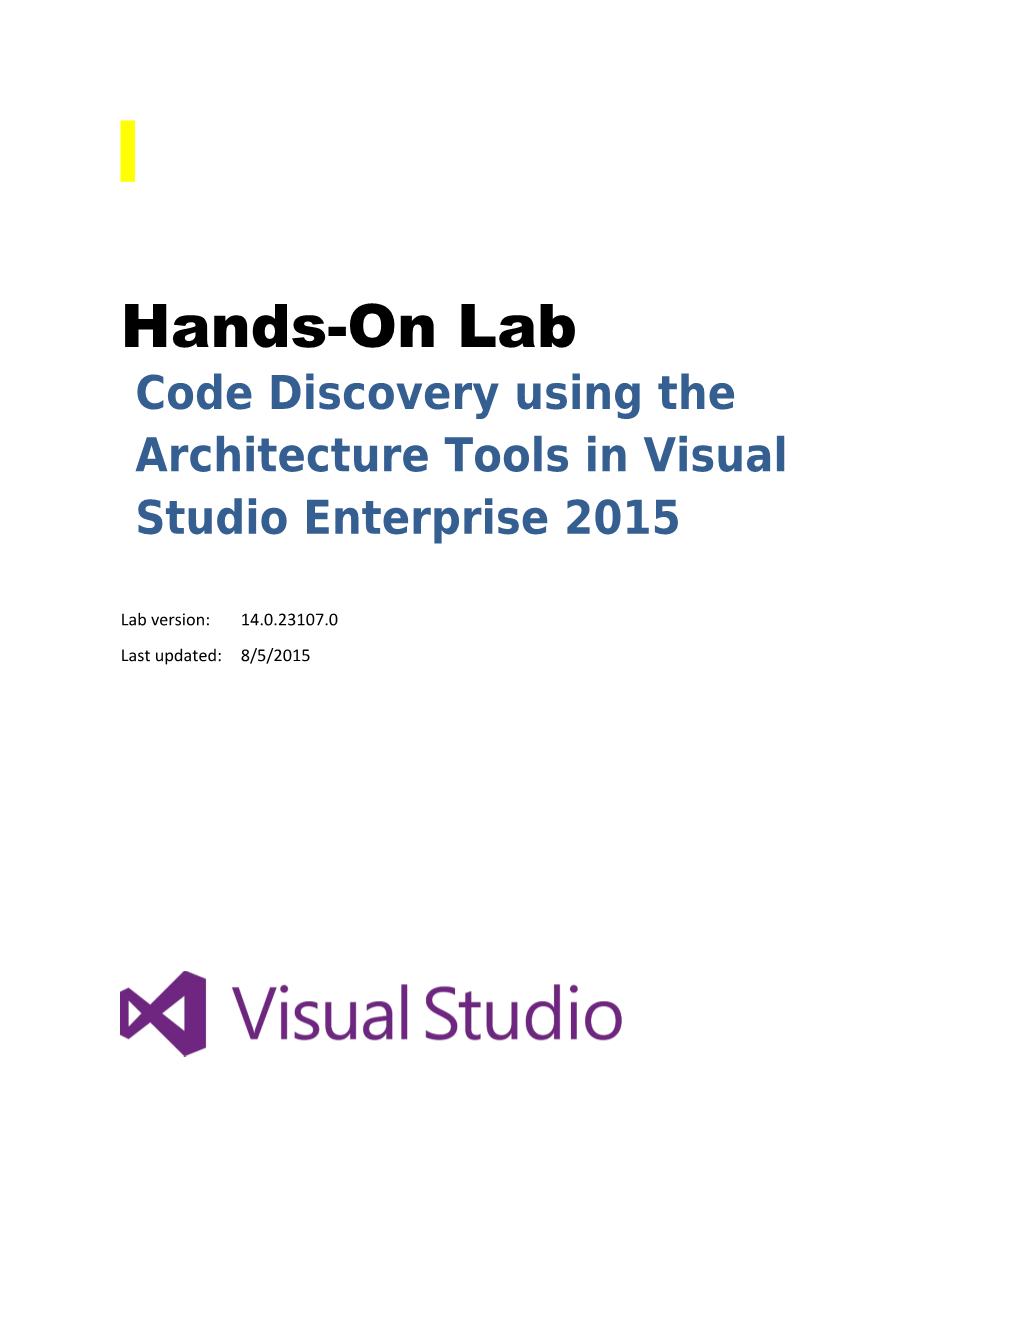 Code Discovery Using the Architecture Tools in Visual Studio Enterprise 2015